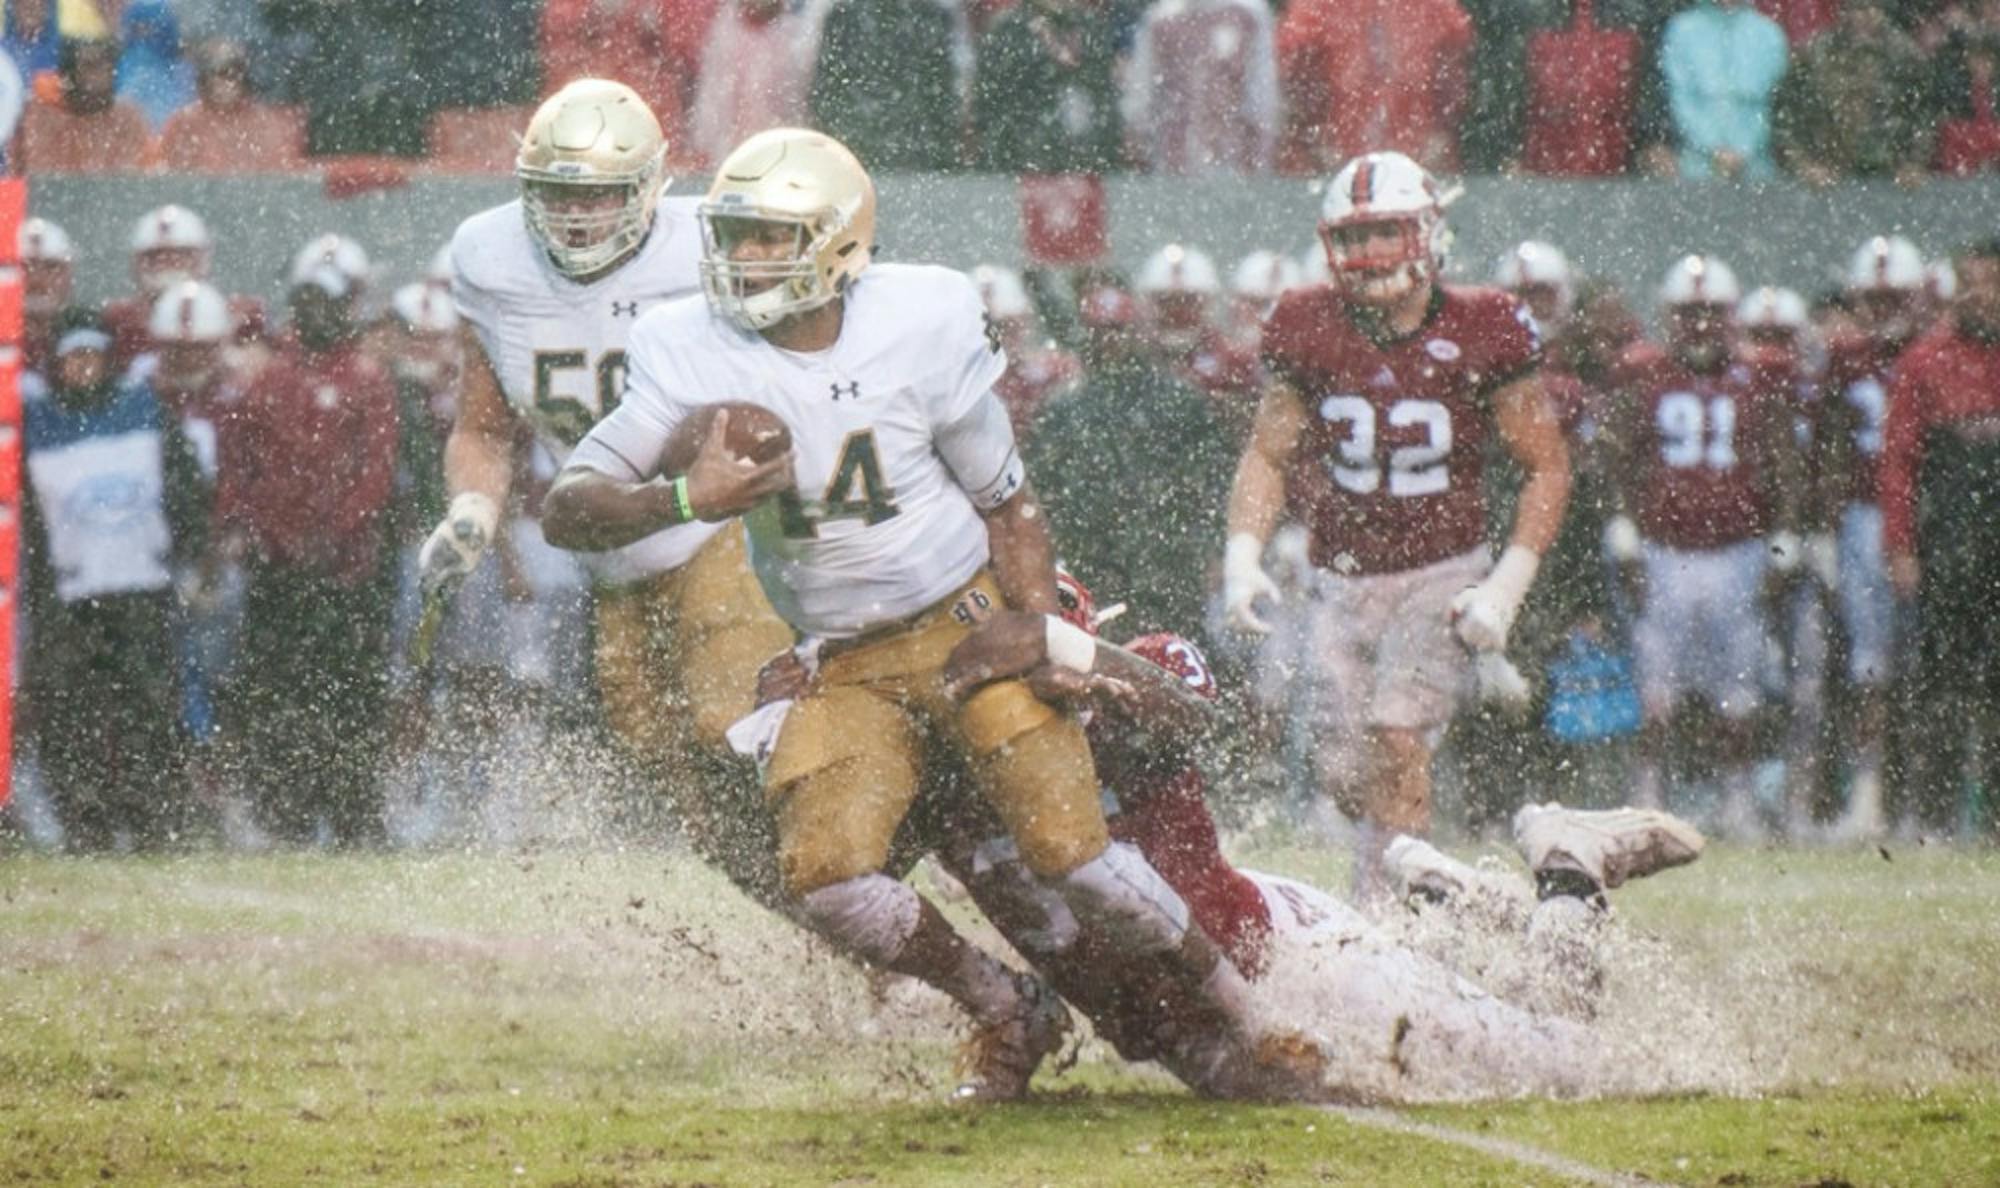 Irish junior quarterback DeShone Kizer is tackled by a North Carolina State defender in one of the puddles that formed at Carter-Finley Stadium as Hurricane Matthew soaked the Raleigh, North Carolina, area.